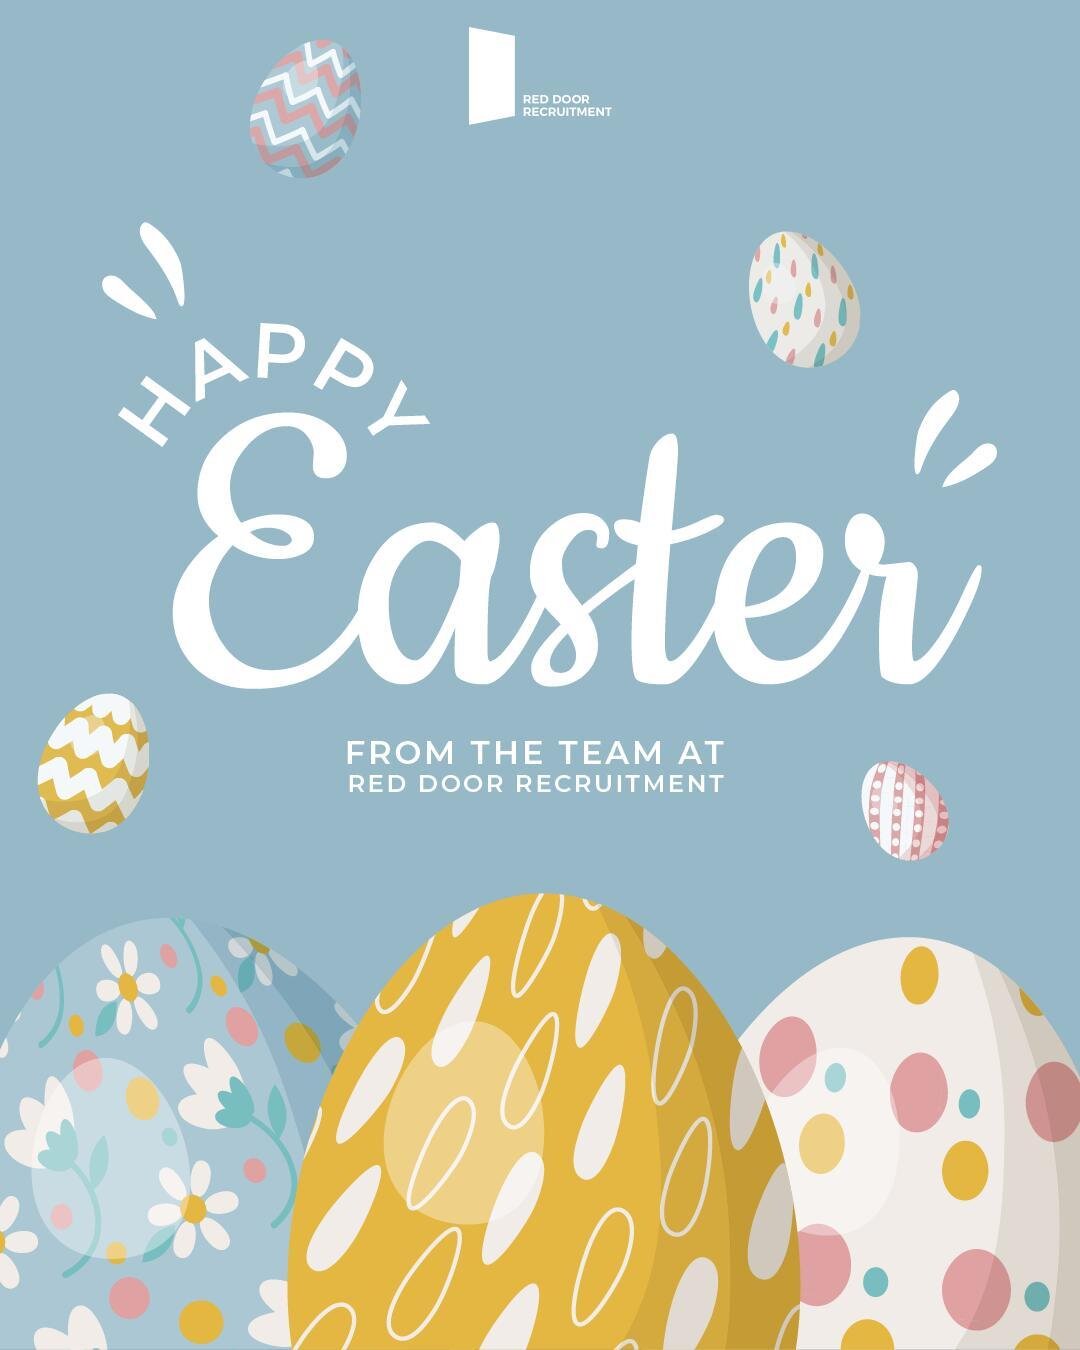 Wishing you all a happy Easter weekend filled with colourful eggs, sweet treats, and joyful celebrations. Happy Easter, everyone! 🐰🌷🐣⁠
⁠
Our office will be closed on Good Friday and Easter Monday, but we will be back in on Tuesday 2nd to help with